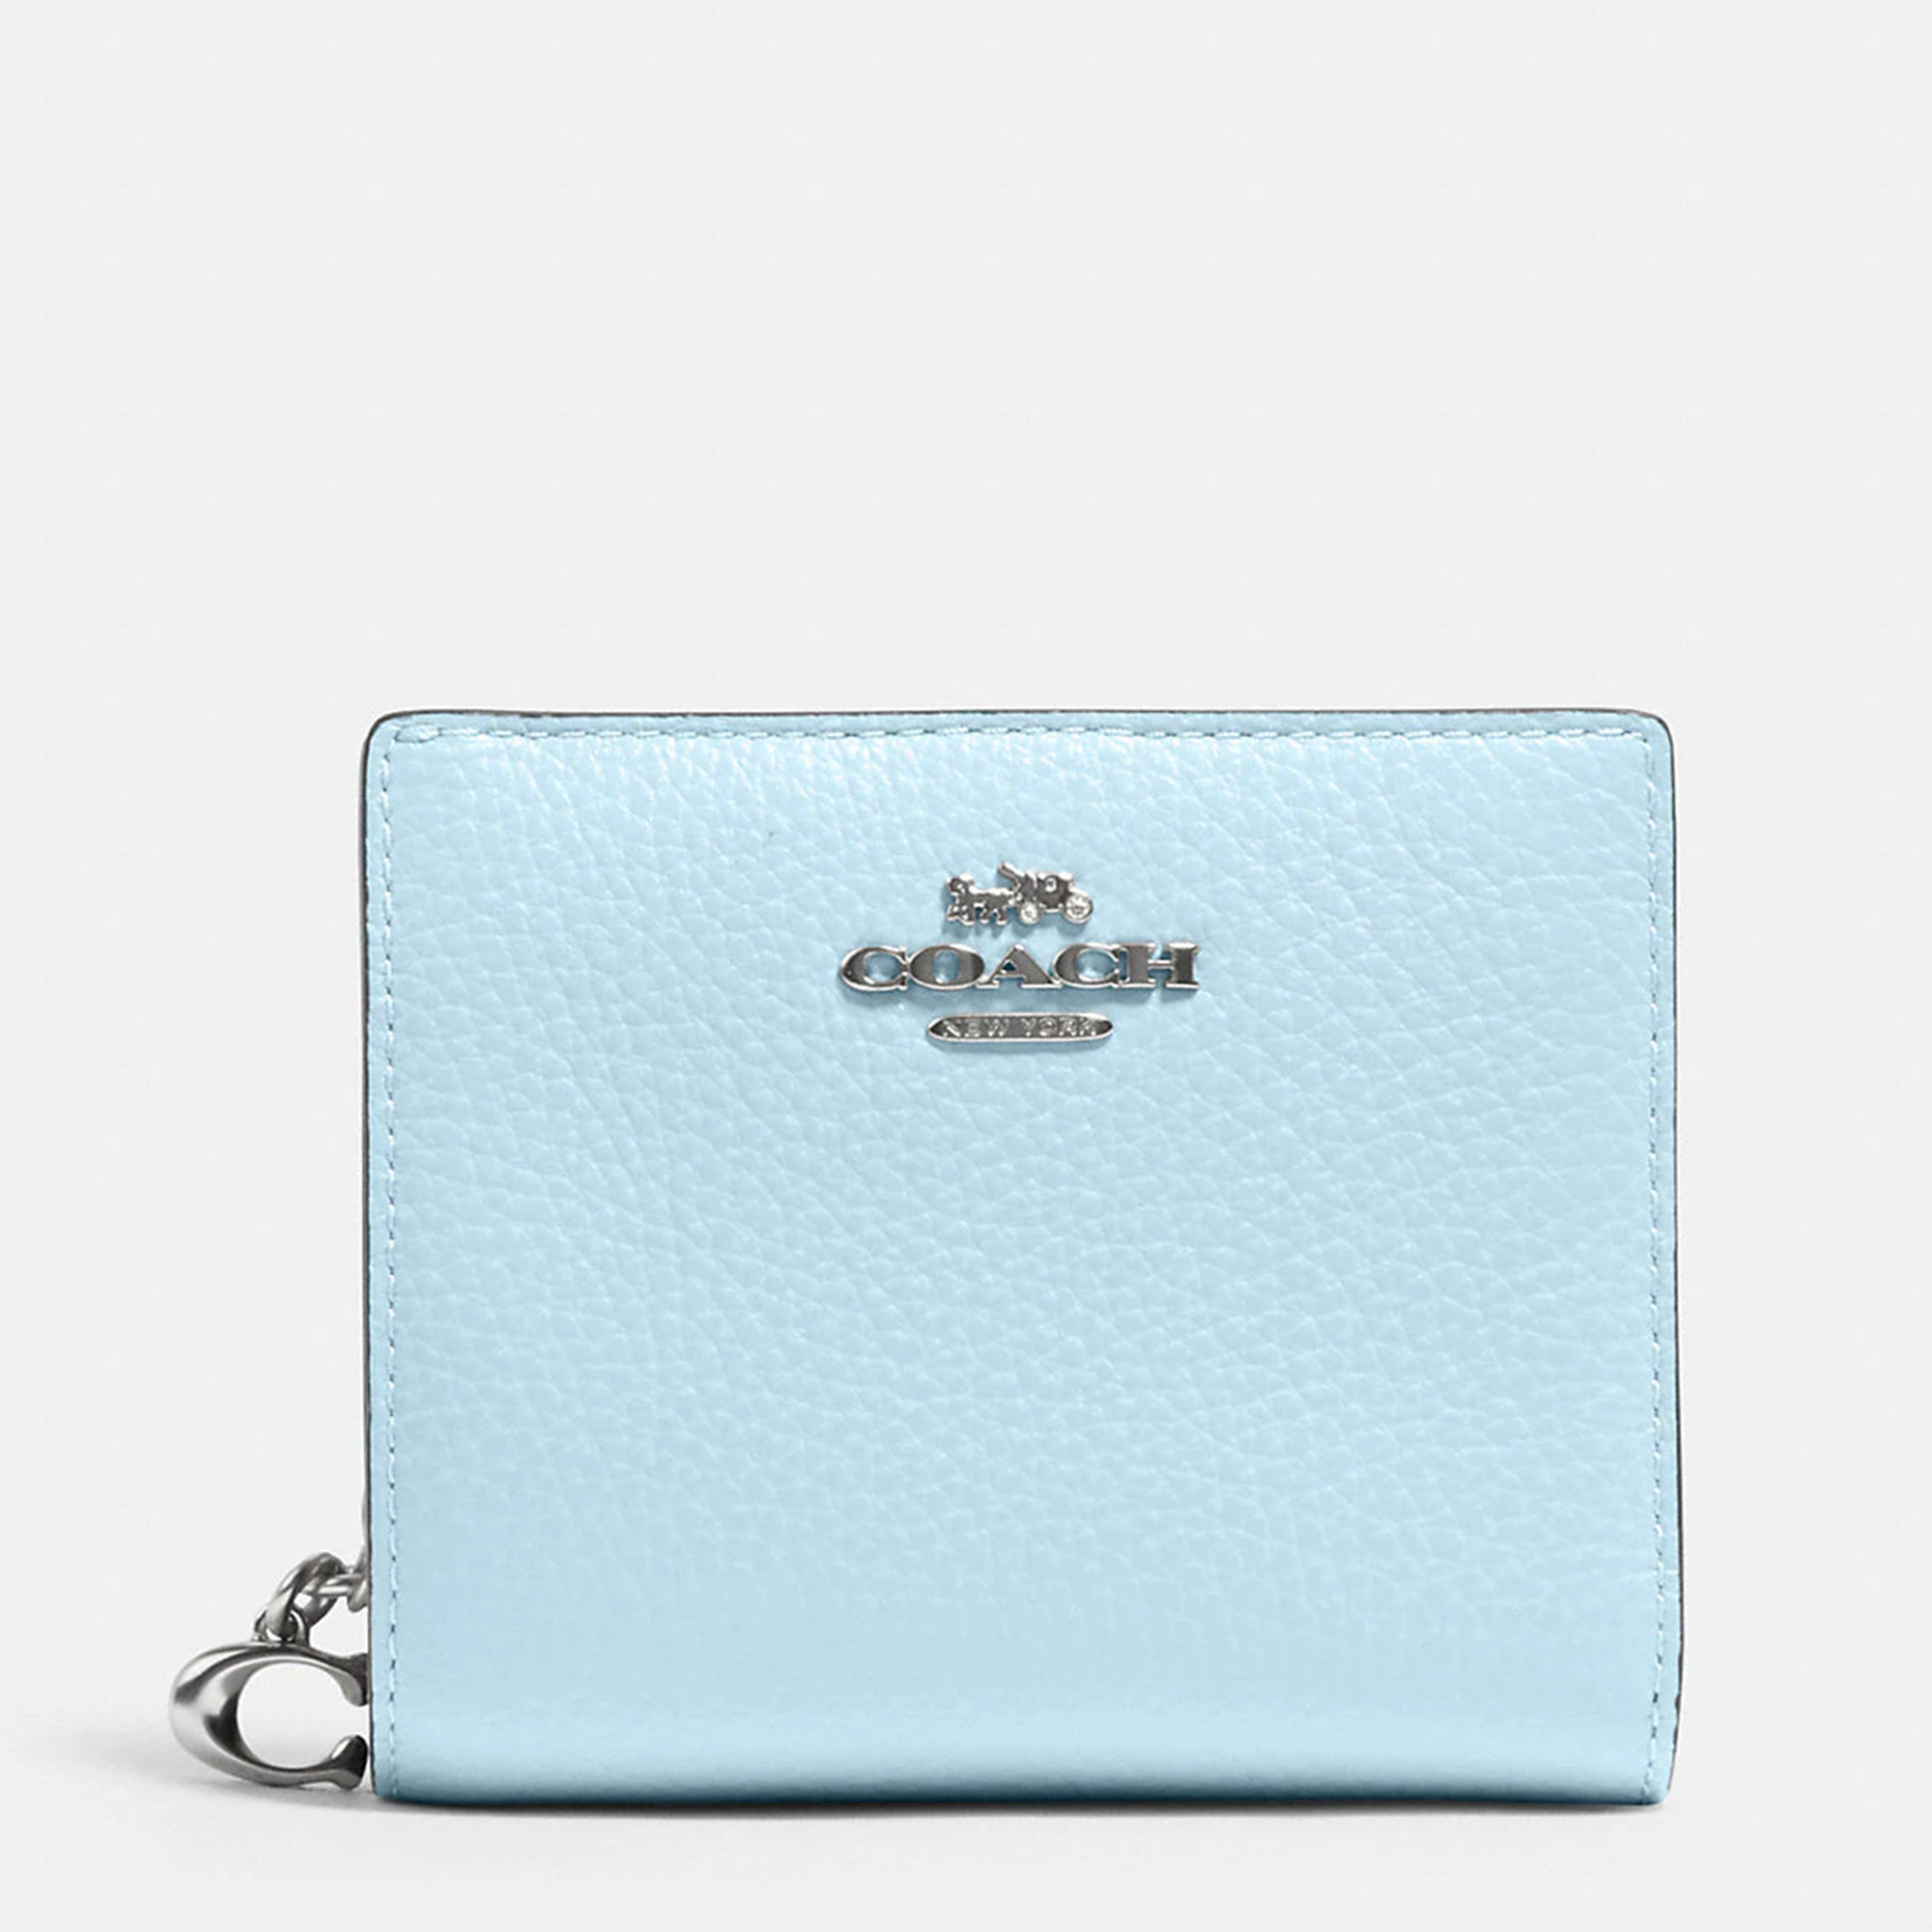 Coach Blue Leather Snap Wallet